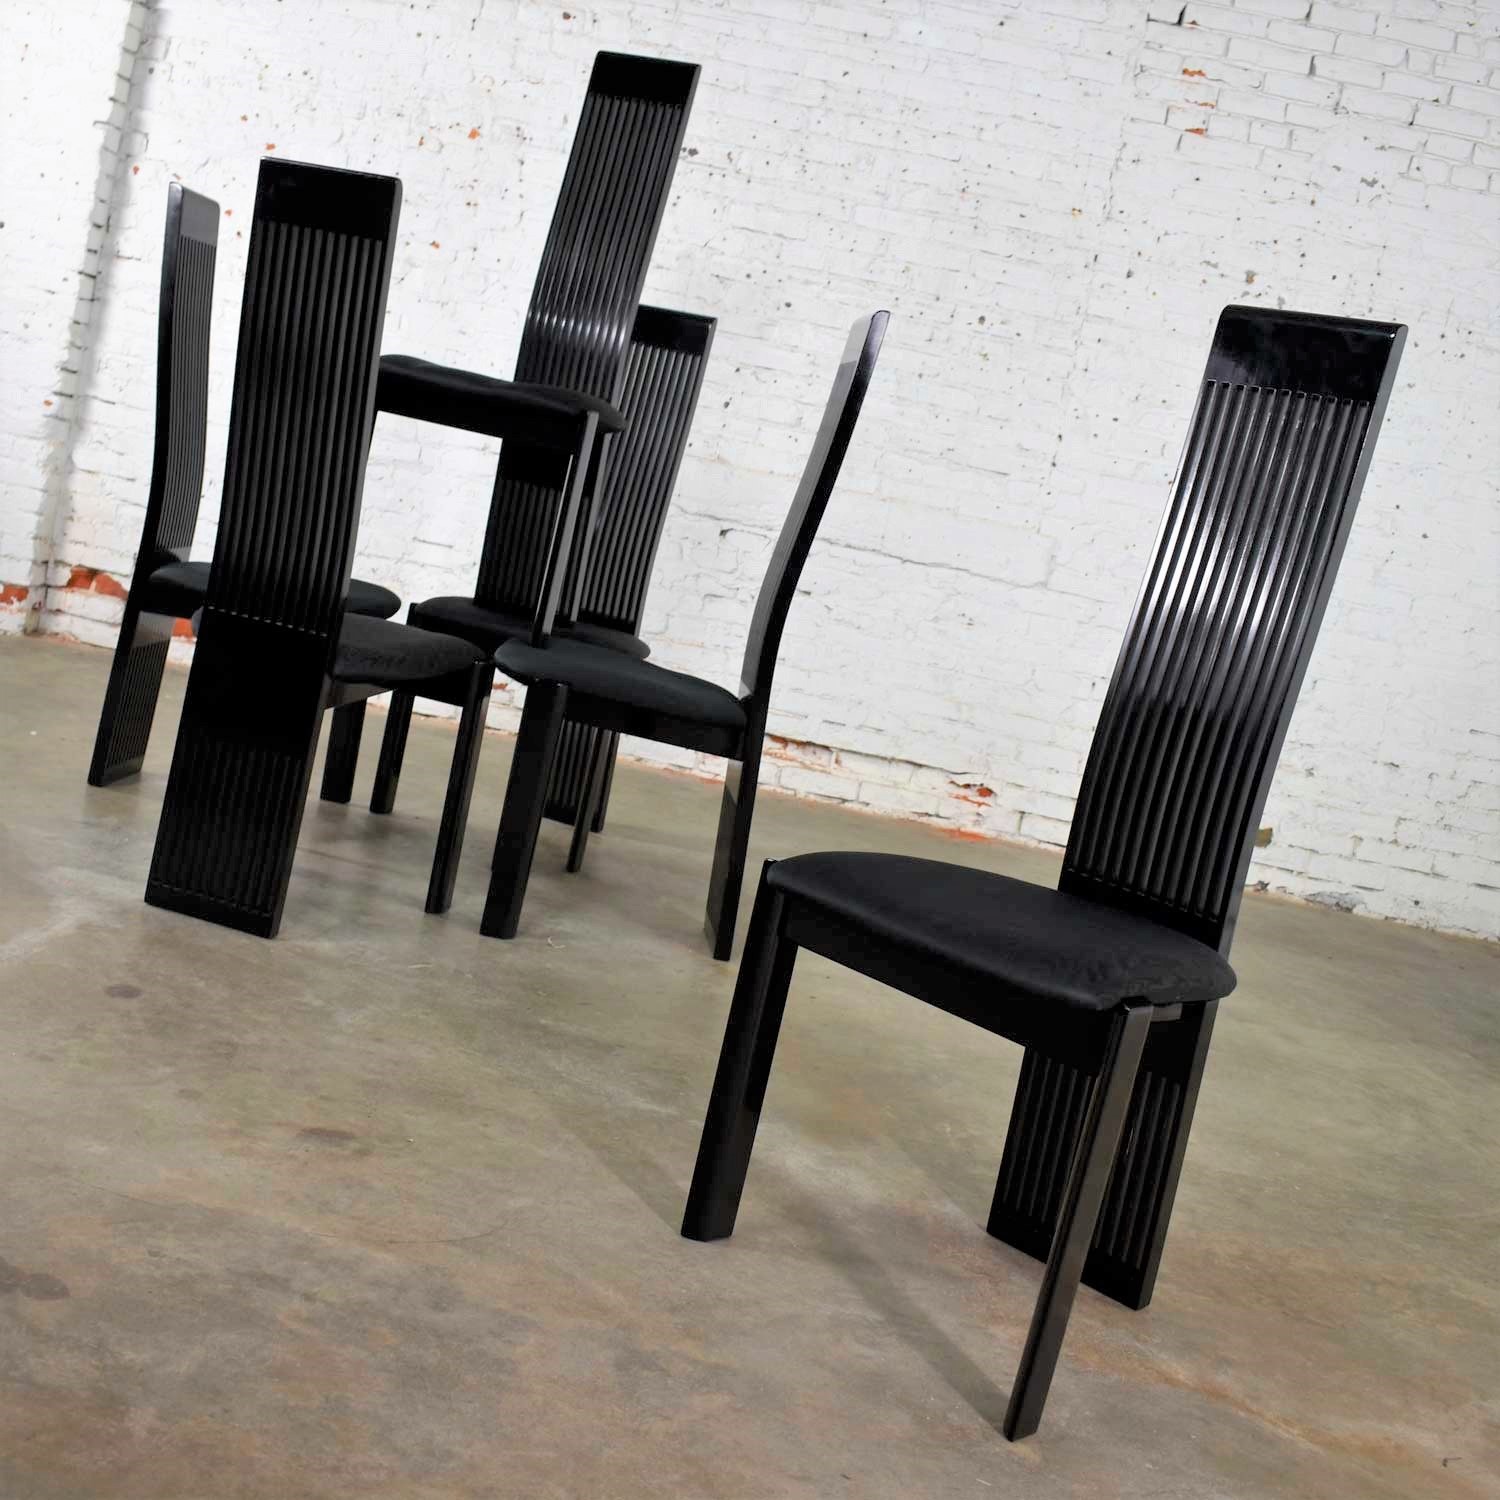 Six Tripod Post Modern Black Lacquer Dining Chairs by Pietro Costantini Made in Italy